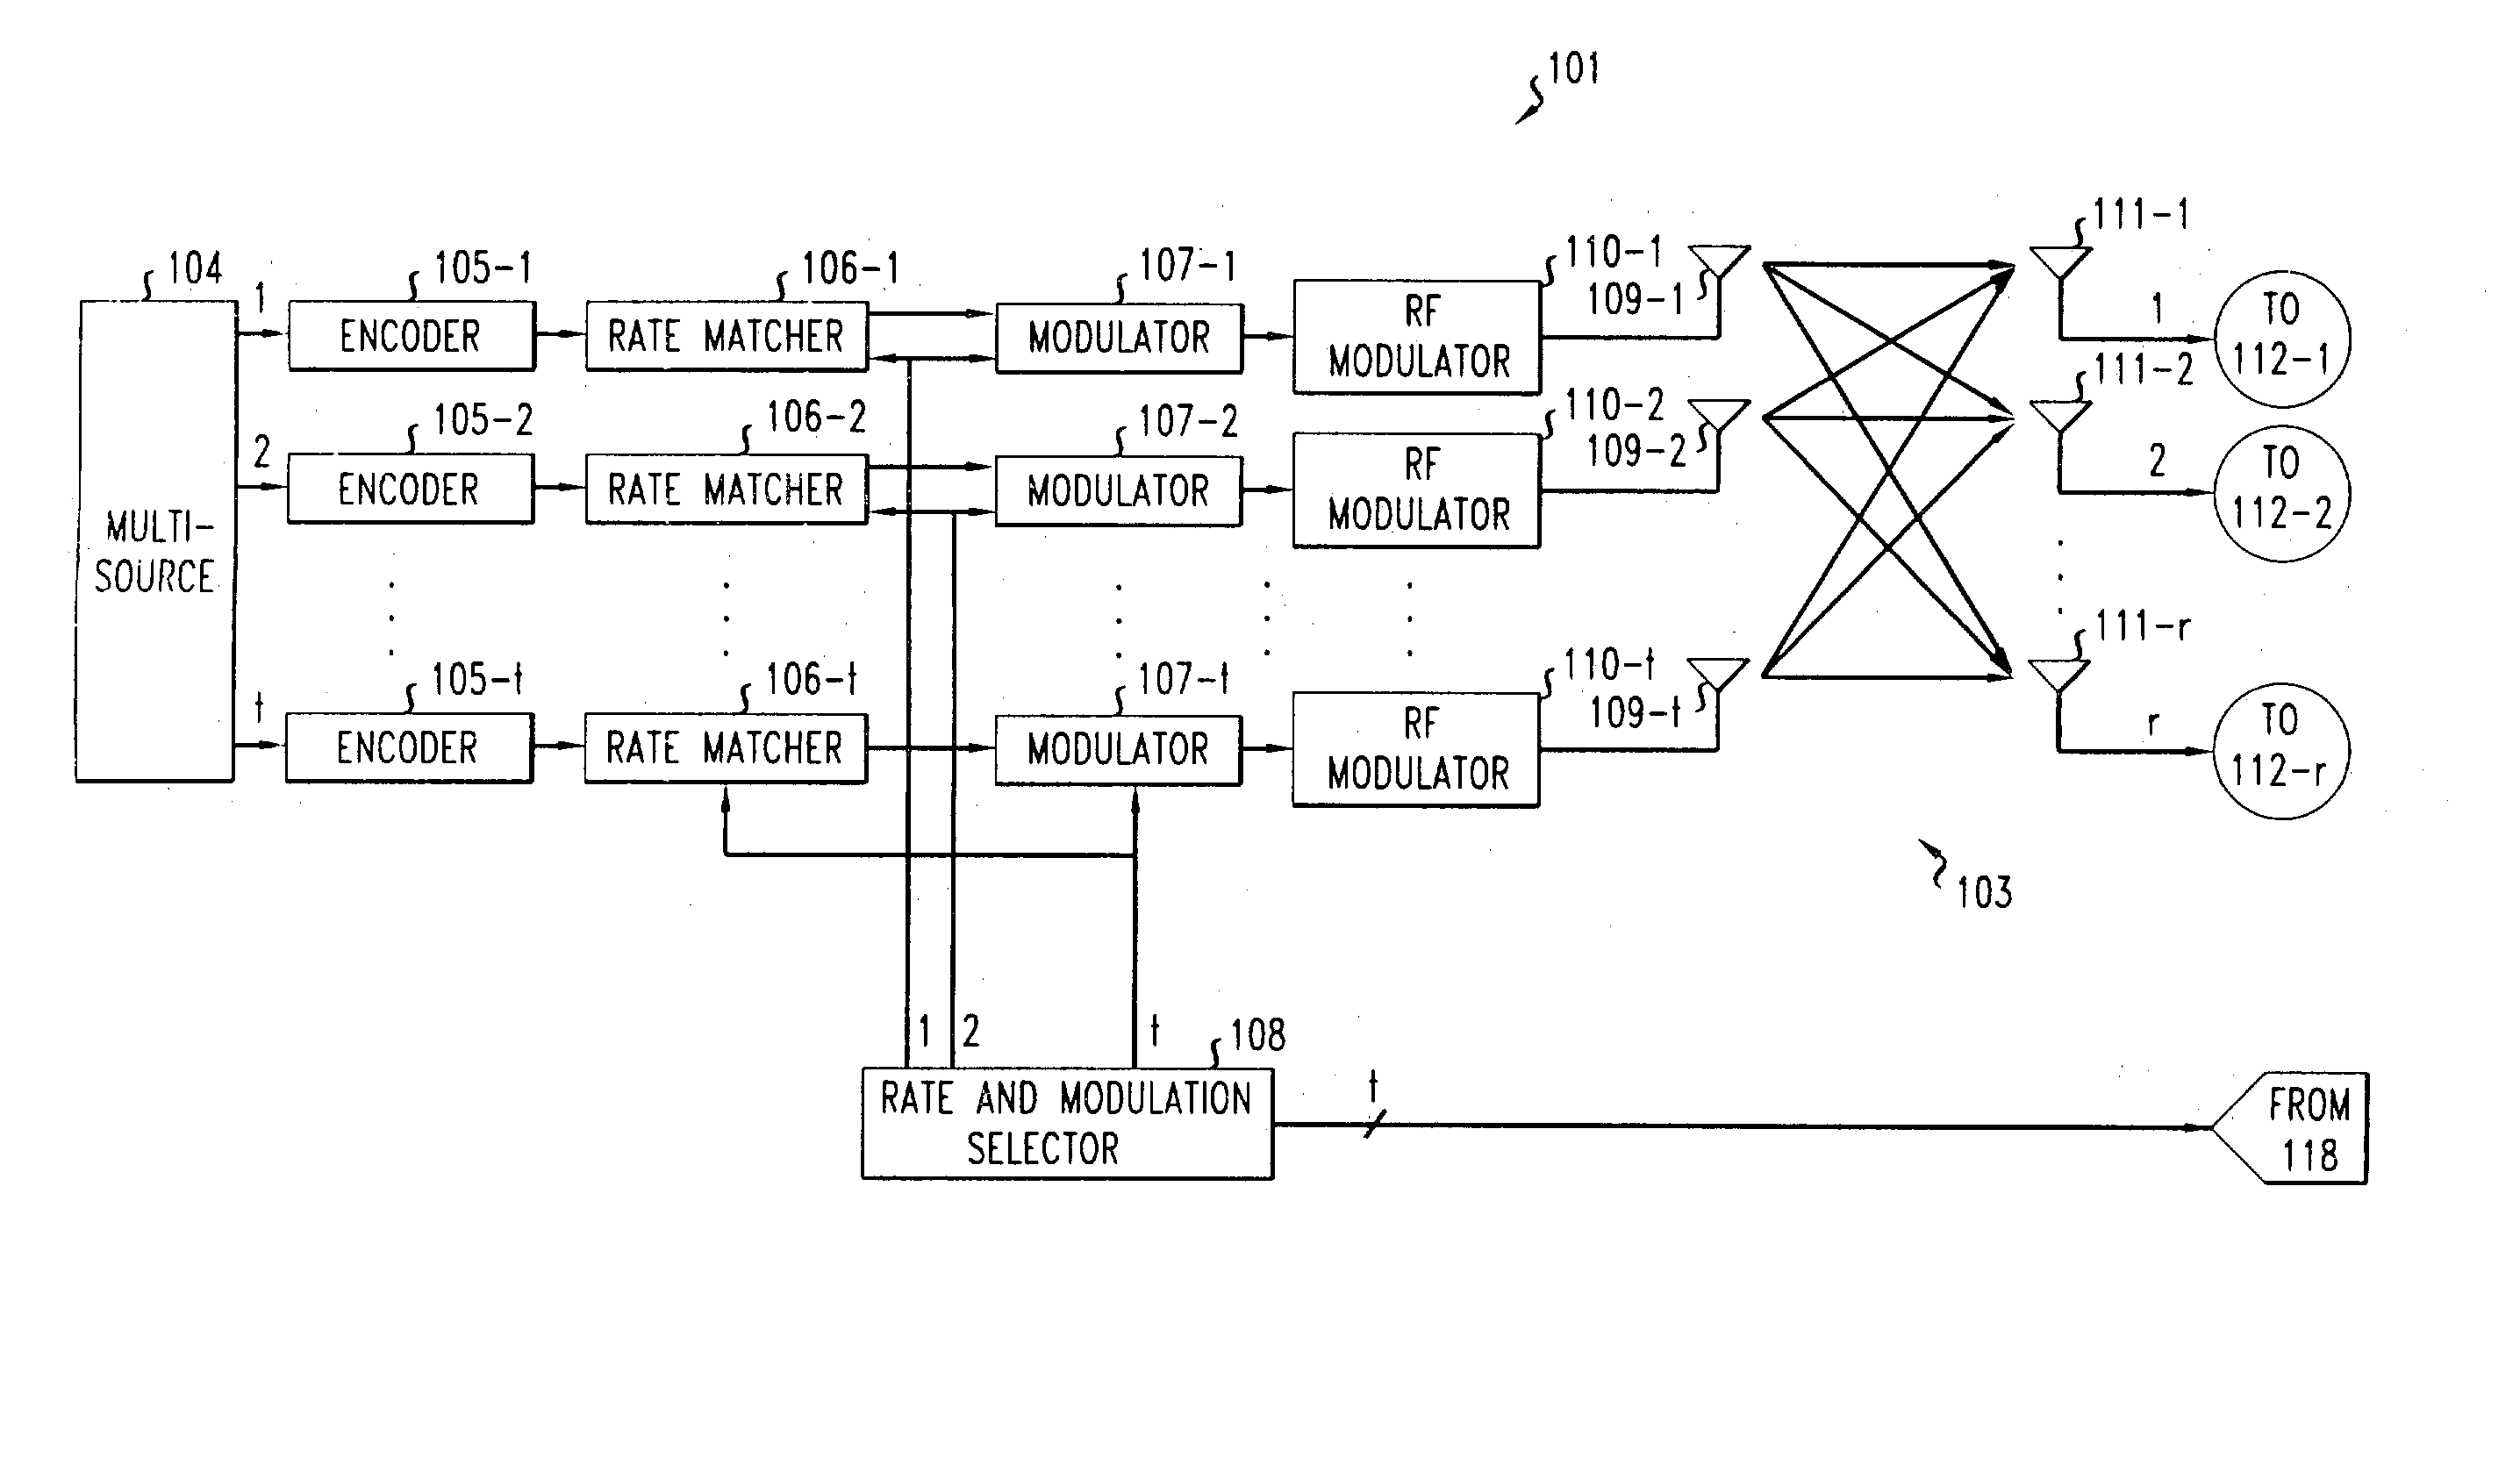 Method of determining the capacity of each transmitter antenna in a multiple input/multiple output (MIMO) wireless system